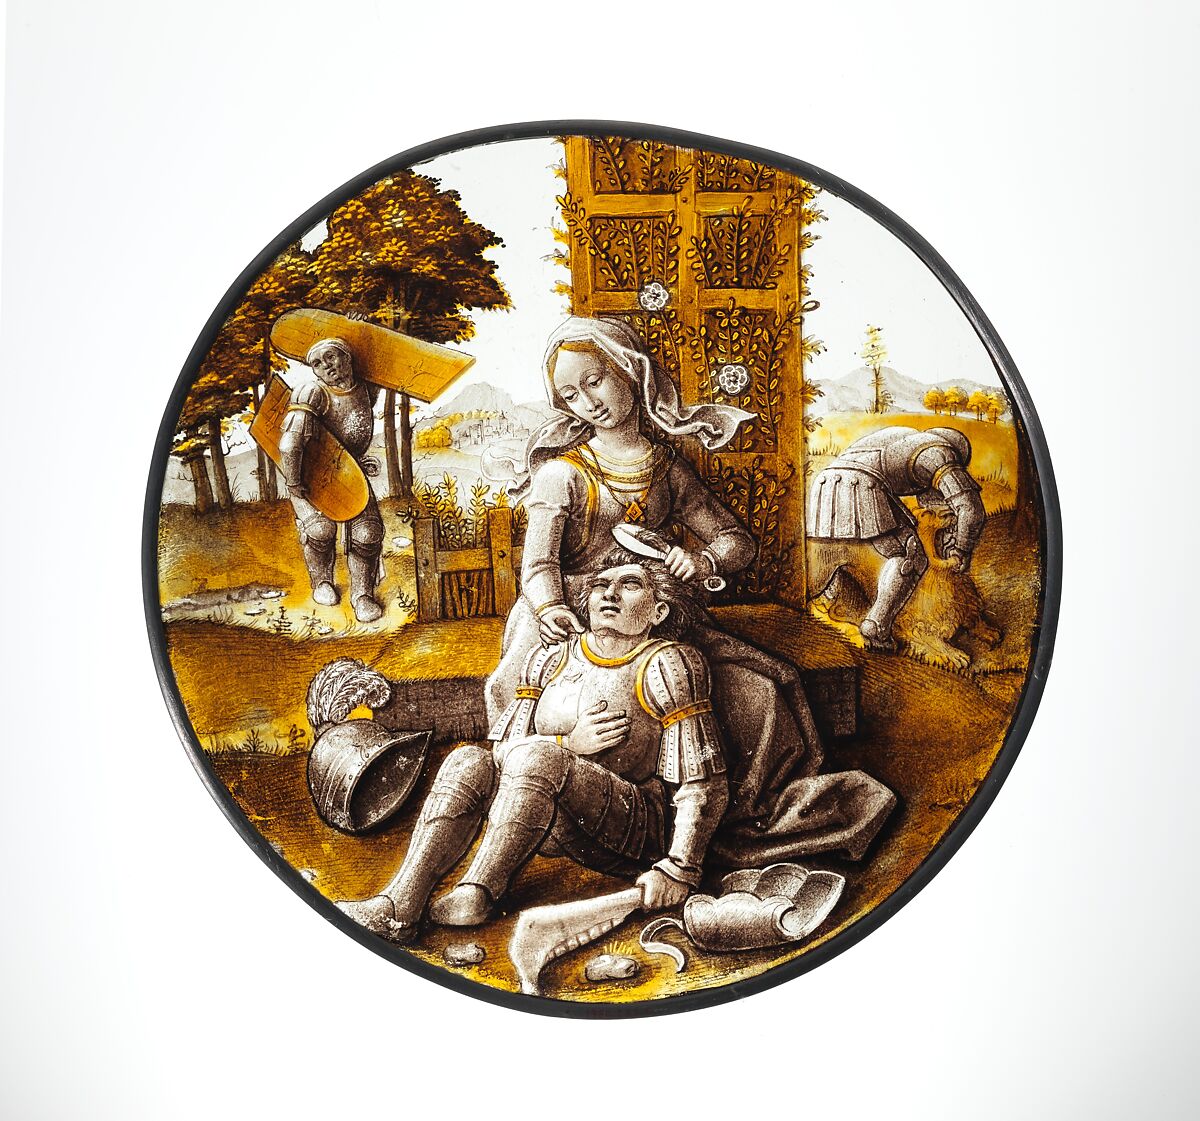 Roundel with Delilah Cutting the Hair of Samson, Colorless glass, vitreous paint and silver stain, North Netherlandish 